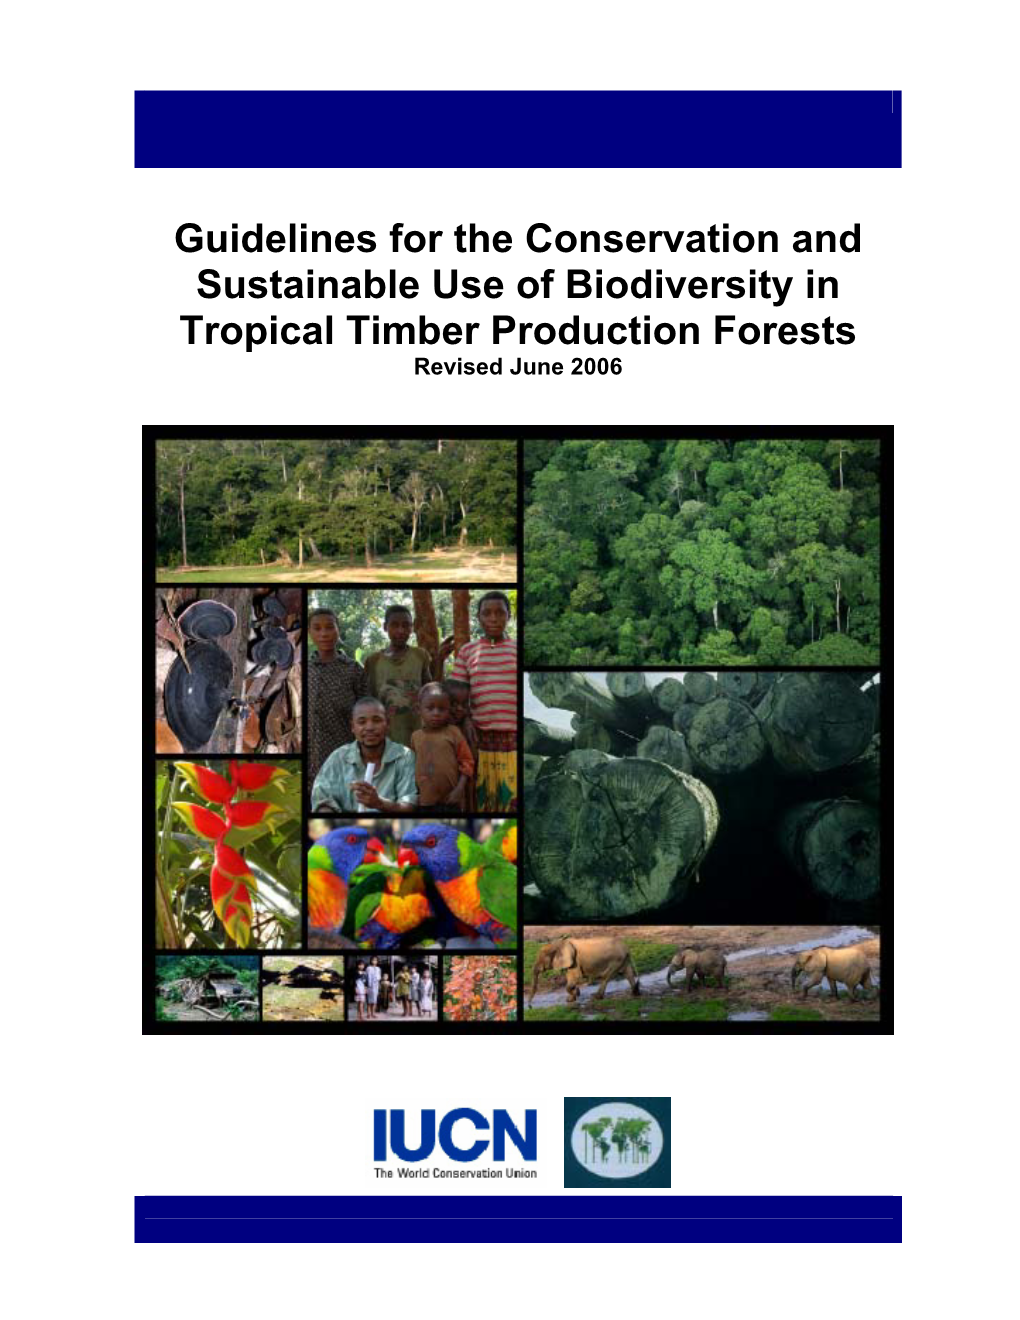 Guidelines for the Conservation and Sustainable Use of Biodiversity in Tropical Timber Production Forests Revised June 2006